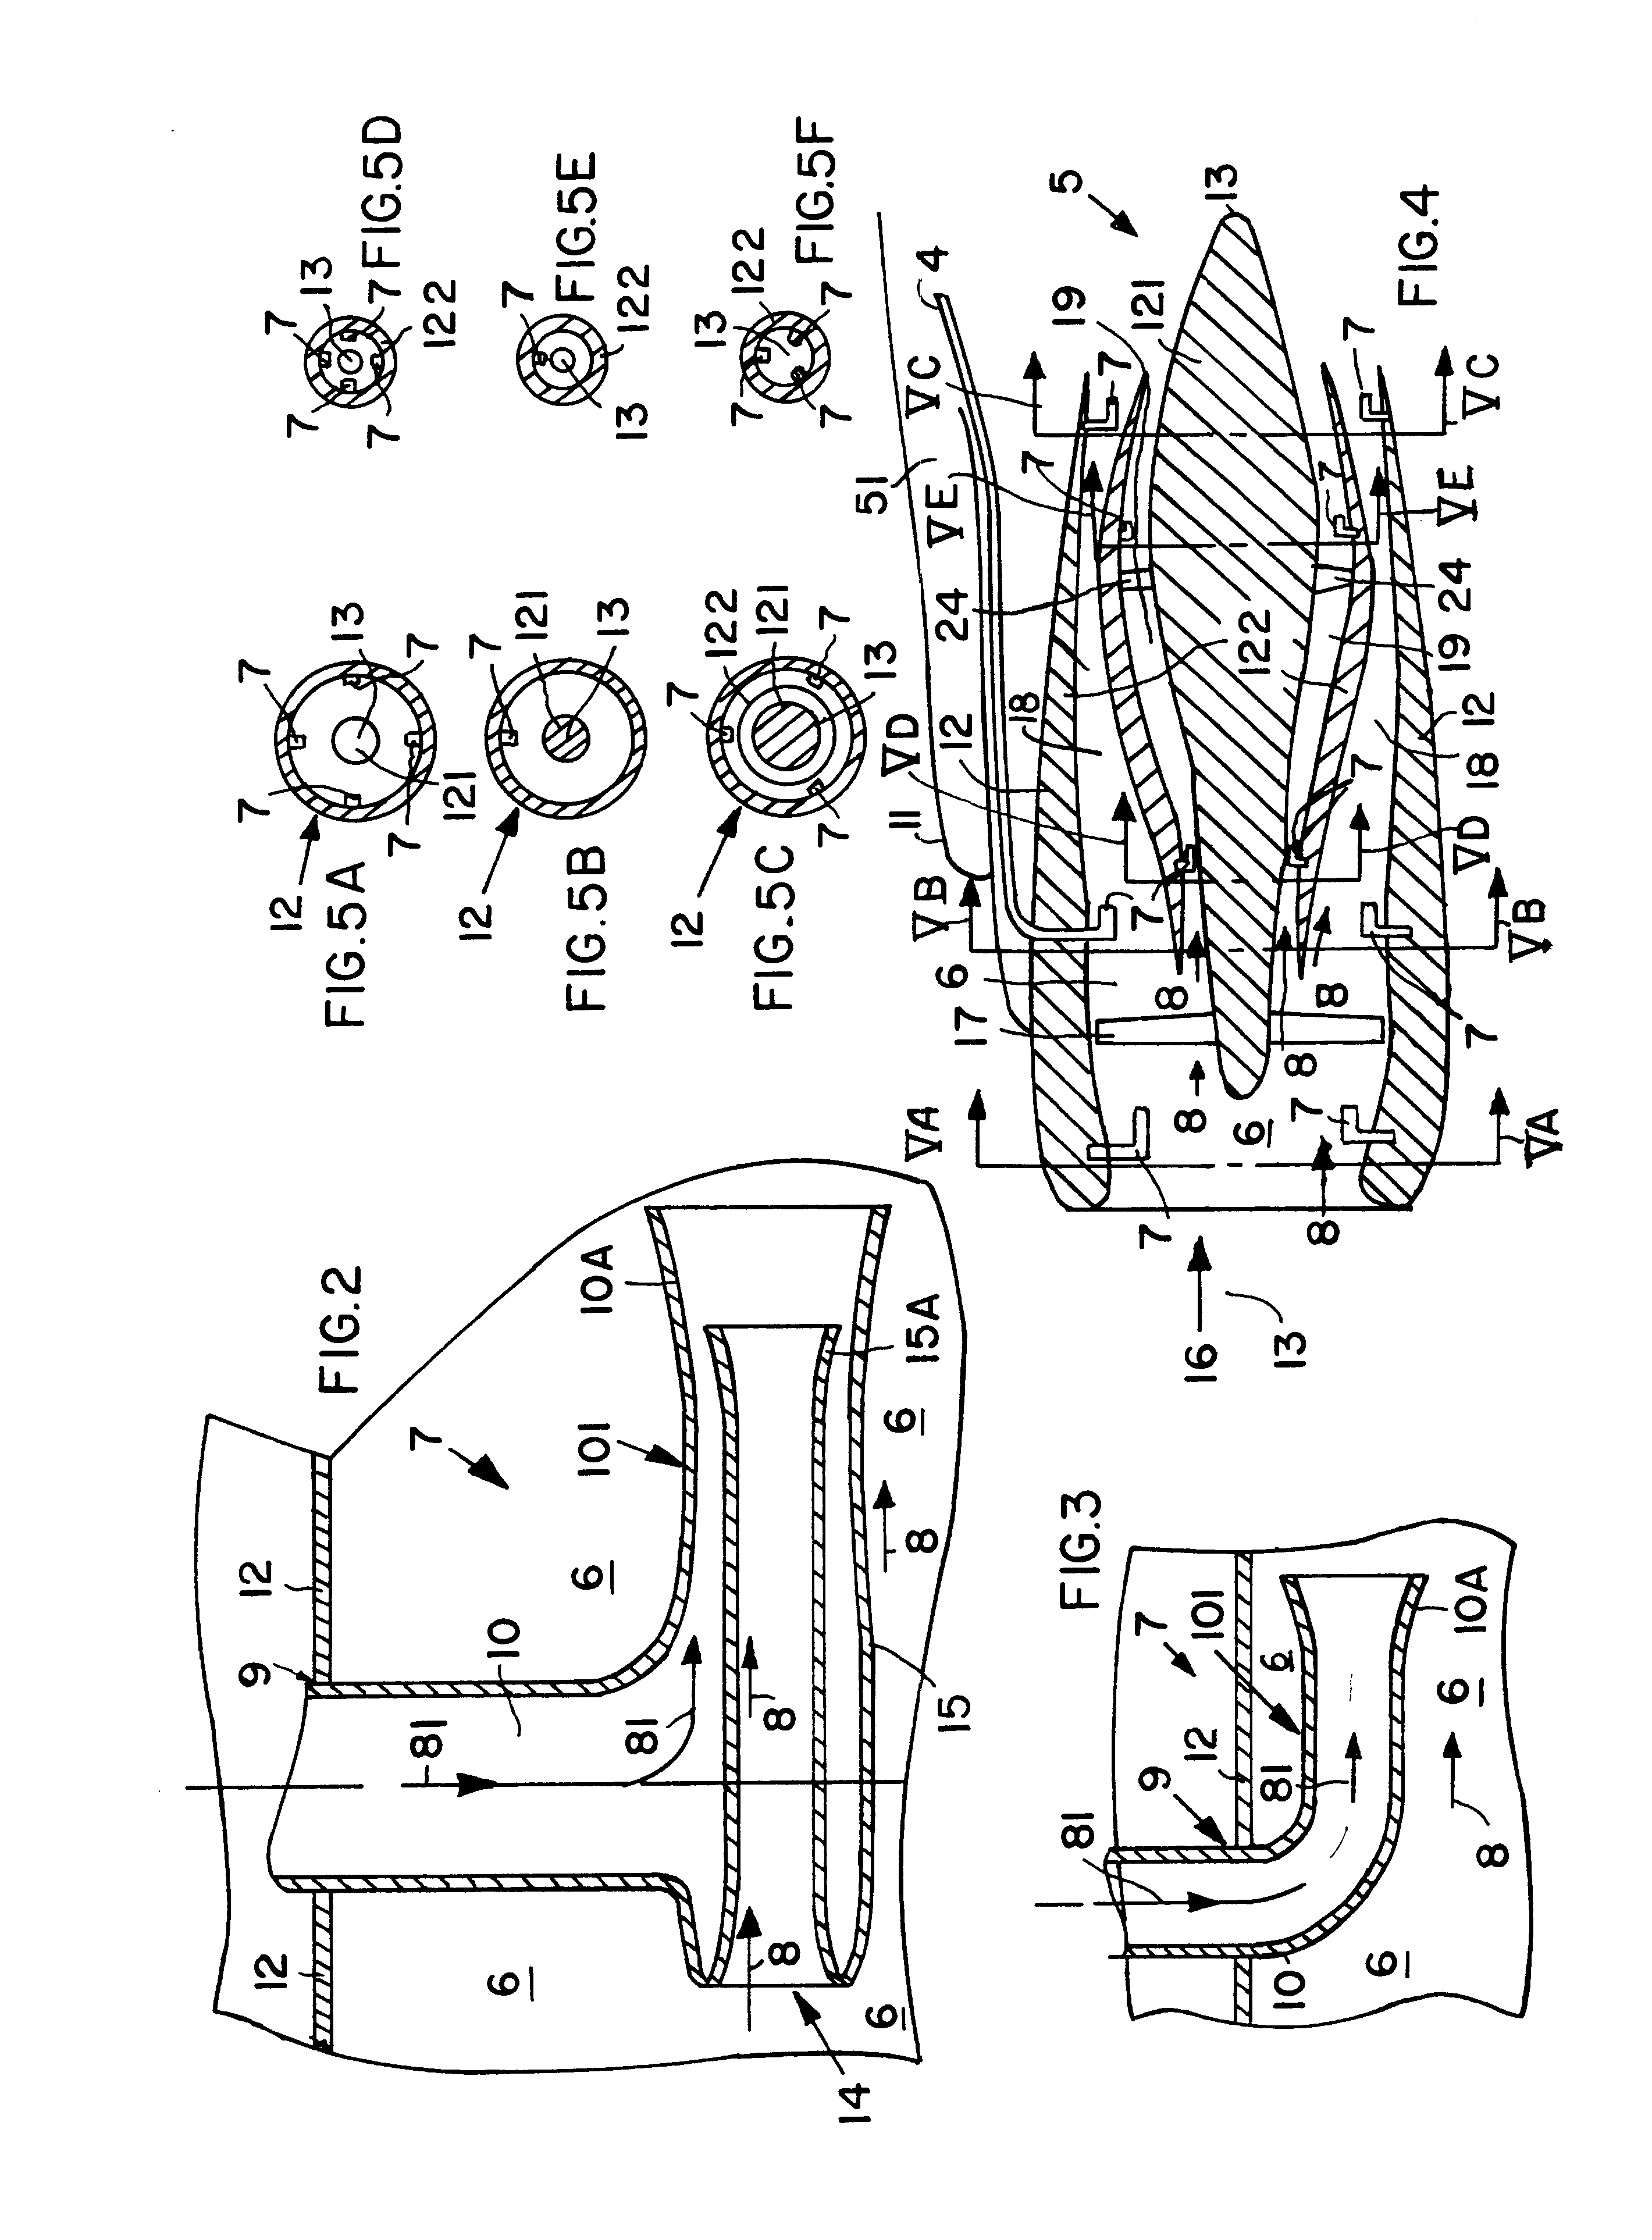 Suction device for boundary layer control in an aircraft